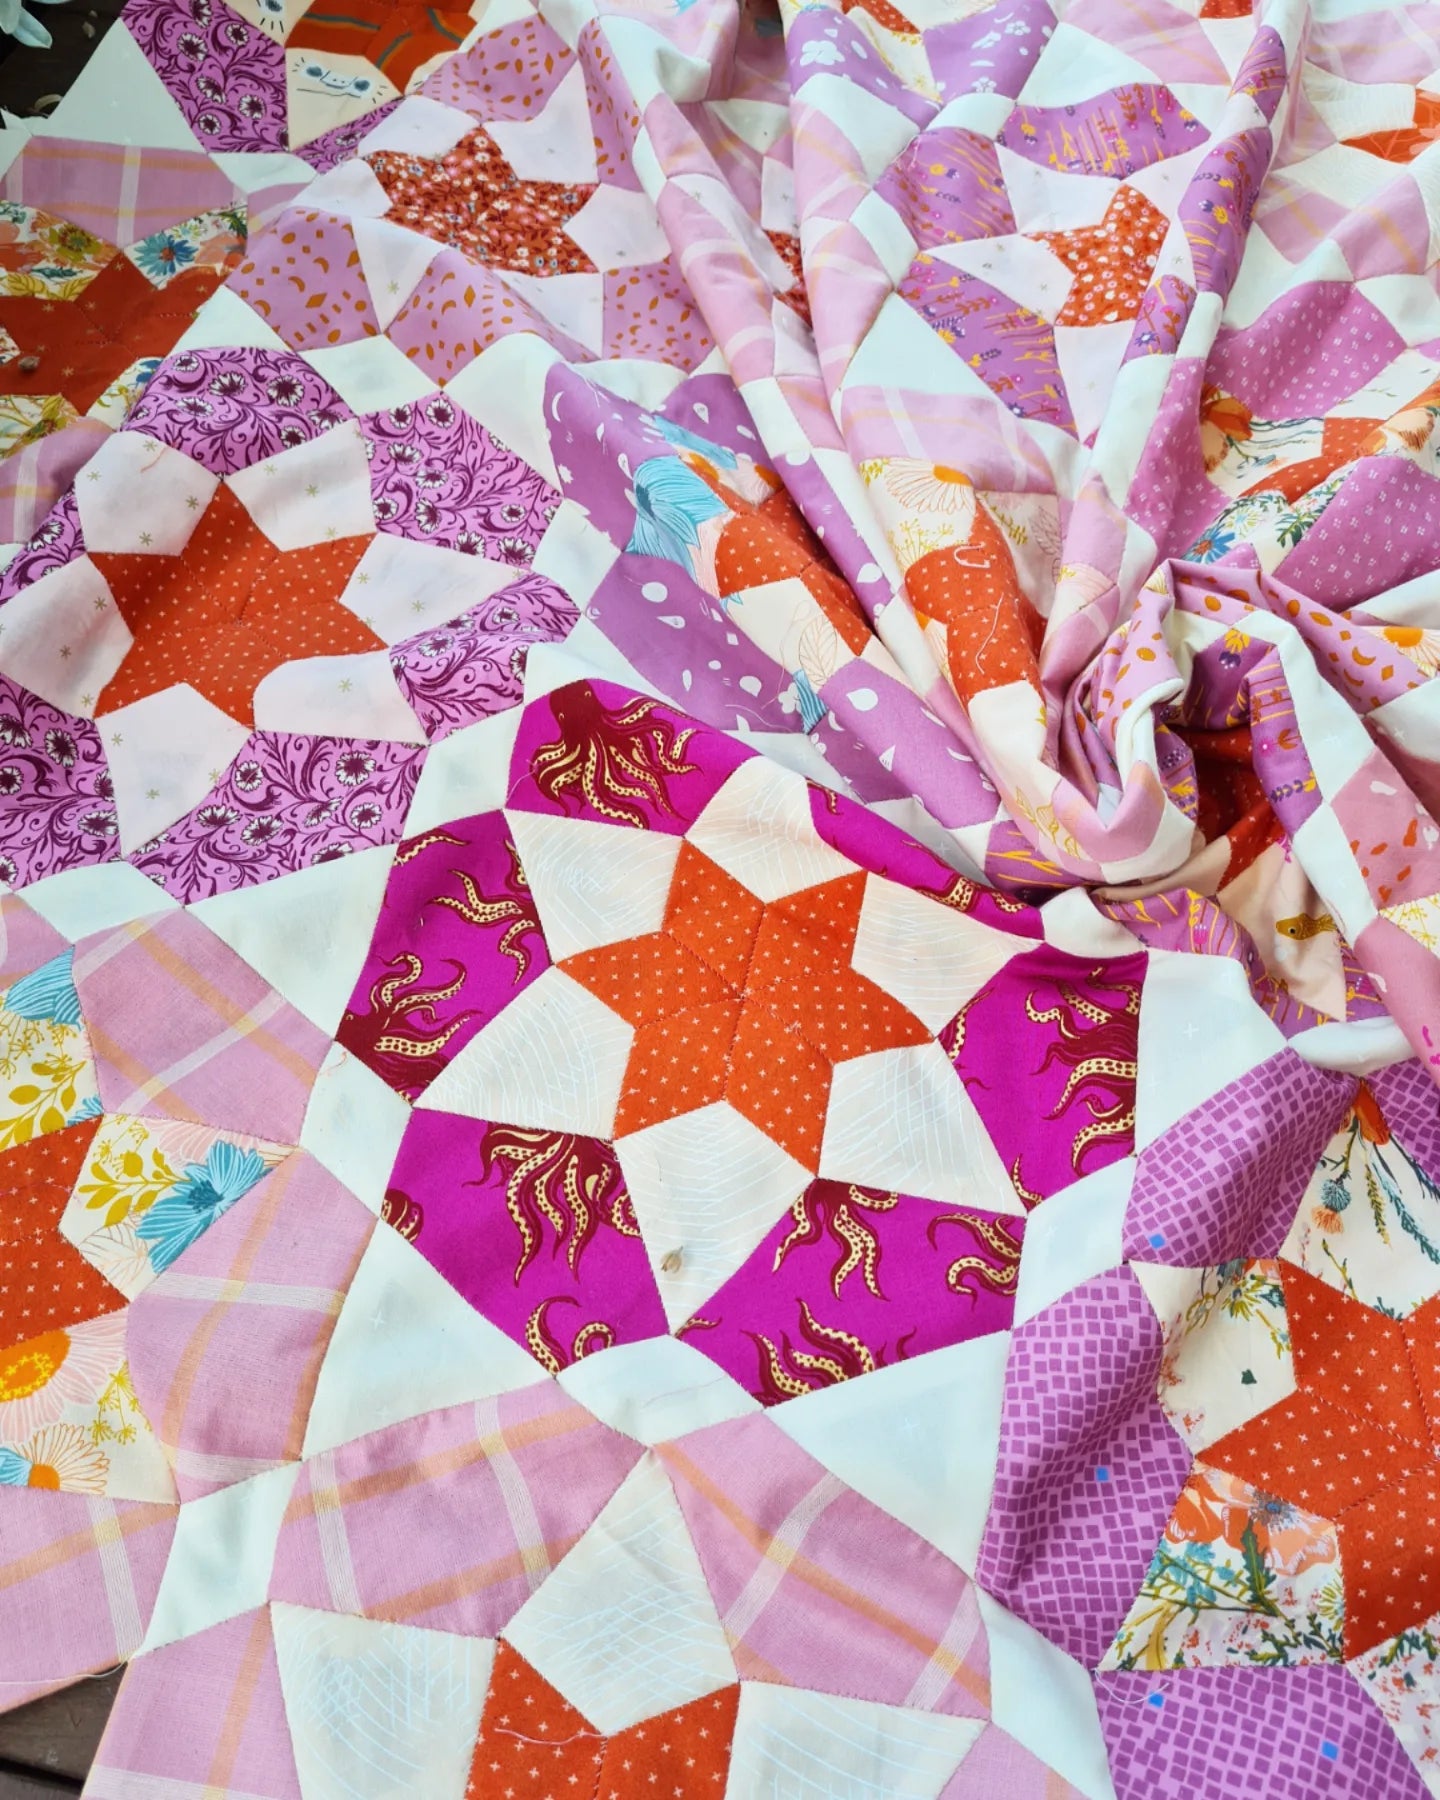 Vermont State Quilt Pattern (and optional fabric bundles) - The